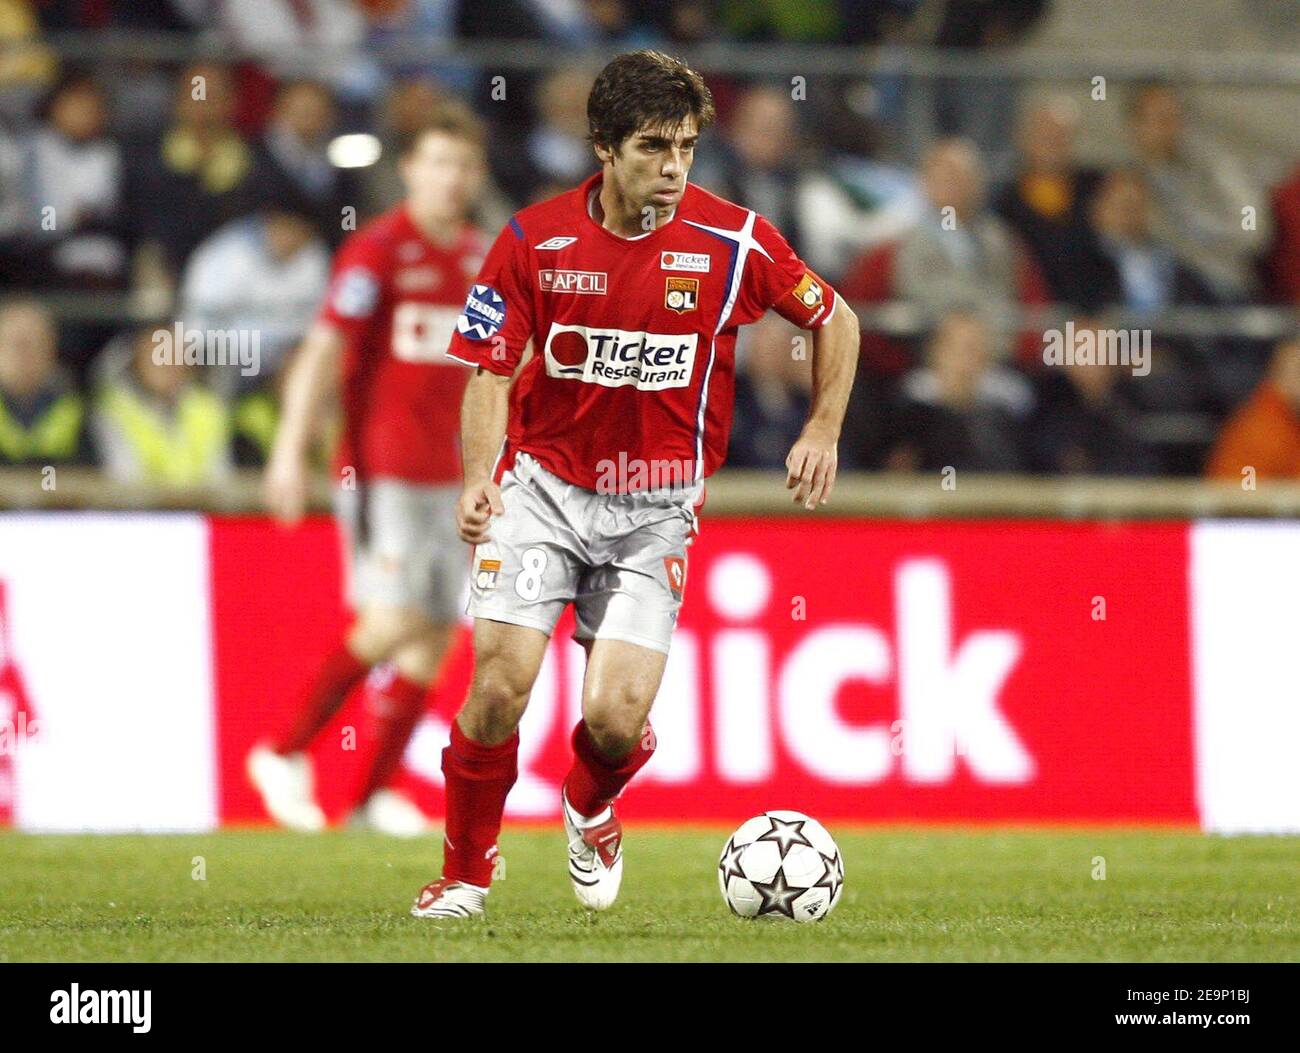 Lyon's Juninho in action during the French first league football match, Olympique de Marseille vs Olympique Lyonnais, at the Velodrome stadium, in Marseille, France, on October 22, 2006. Lyon won 4-1. Photo by Christian Liewig/ABACAPRESS.COM Stock Photo